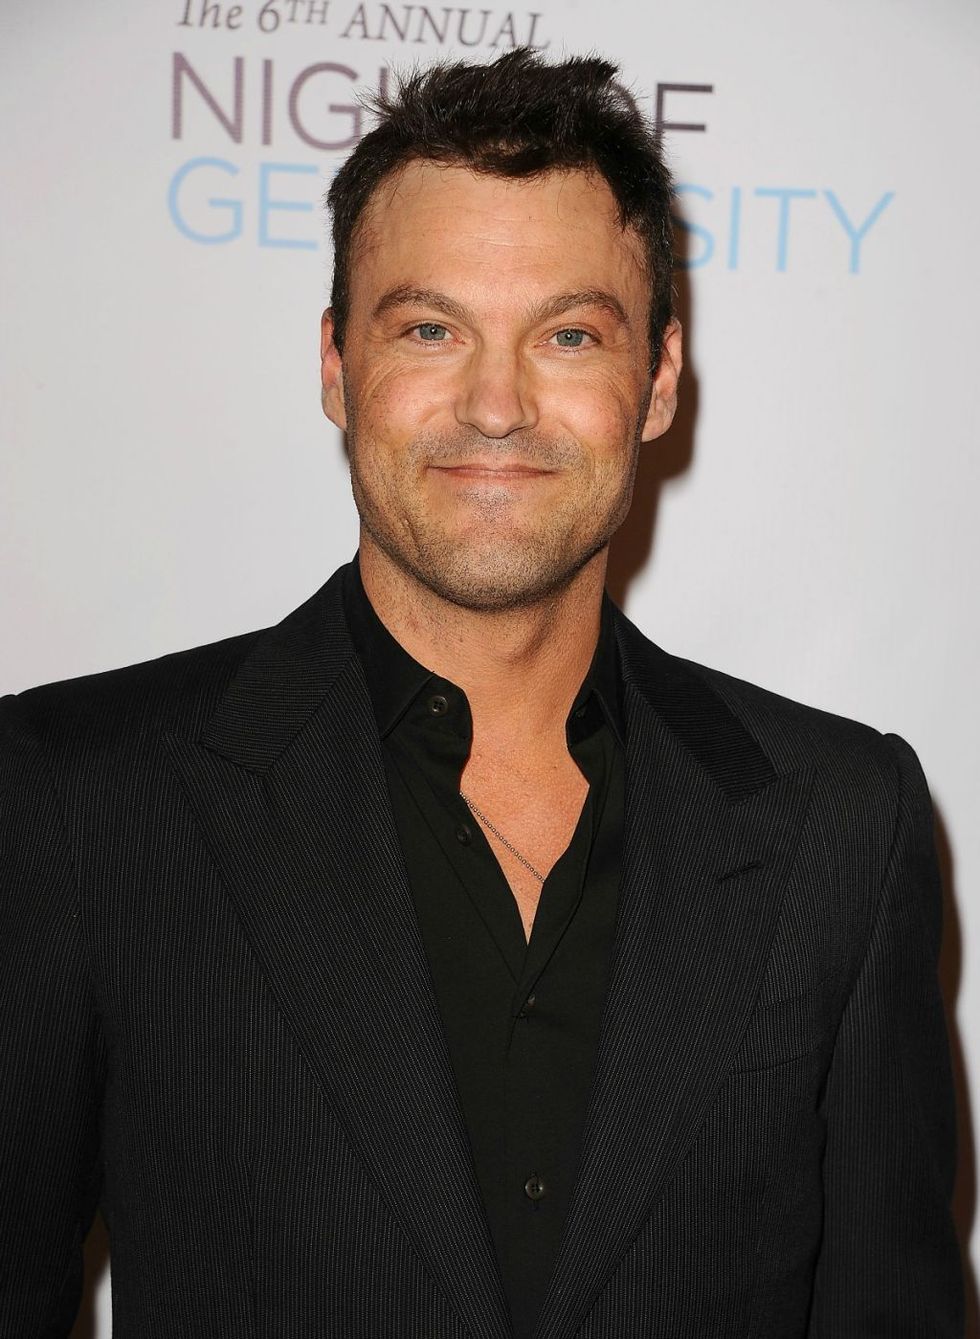 <p>Did you know Brian Austin Green released a hip-hop album in 1996? Similar to his <em data-redactor-tag="em" data-verified="redactor">Beverly Hills, 90210</em><span class="redactor-invisible-space" data-verified="redactor" data-redactor-tag="span" data-redactor-class="redactor-invisible-space"></span> character&nbsp;David Silve<span class="redactor-invisible-space" data-verified="redactor" data-redactor-tag="span" data-redactor-class="redactor-invisible-space">r, the actor took a stab at a music career. Even though it&nbsp;didn't take off, Brian continued to act after <em data-redactor-tag="em" data-verified="redactor">90210</em> wrapped, making guest appearances on everything from <em data-redactor-tag="em" data-verified="redactor">CSI</em>&nbsp;to <em data-redactor-tag="em" data-verified="redactor">Desperate&nbsp;Housewives</em>. He had larger roles in&nbsp;2005's <em data-redactor-tag="em" data-verified="redactor">Freddie</em> with Freddie Prinze, Jr. and&nbsp;2008's&nbsp;<em data-redactor-tag="em" data-verified="redactor">Terminator: The Sarah Connor Chronicles<span class="redactor-invisible-space" data-verified="redactor" data-redactor-tag="span" data-redactor-class="redactor-invisible-space"></span></em><span class="redactor-invisible-space" data-verified="redactor" data-redactor-tag="span" data-redactor-class="redactor-invisible-space"><em data-redactor-tag="em" data-verified="redactor">.&nbsp;</em><span class="redactor-invisible-space" data-verified="redactor" data-redactor-tag="span" data-redactor-class="redactor-invisible-space">Most recently, he starred with Charlie Sheen in FX's <em data-redactor-tag="em" data-verified="redactor">Anger Management</em>. Brian is&nbsp;often found in the tabloids, thanks to his <a href="http://www.usmagazine.com/celebrity-news/news/pregnant-megan-fox-and-brian-austin-green-are-back-together-w211587" target="_blank" data-tracking-id="recirc-text-link">on-again-off-again&nbsp;relationship</a> with actress Megan Fox. He and Megan have <a href="http://www.eonline.com/news/770097/megan-fox-gives-birth-actress-welcomes-baby-no-3-with-brian-austin-green" target="_blank" data-tracking-id="recirc-text-link">three sons together</a>&nbsp;(Brian also&nbsp;has a fourth&nbsp;child from a previous relationship with actress&nbsp;Vanessa Marcil, who appeared&nbsp;in seasons 9 and 10 of <em data-redactor-tag="em" data-verified="redactor">90210</em>).&nbsp;</span><span class="redactor-invisible-space" data-verified="redactor" data-redactor-tag="span" data-redactor-class="redactor-invisible-space"></span></span></span></p>